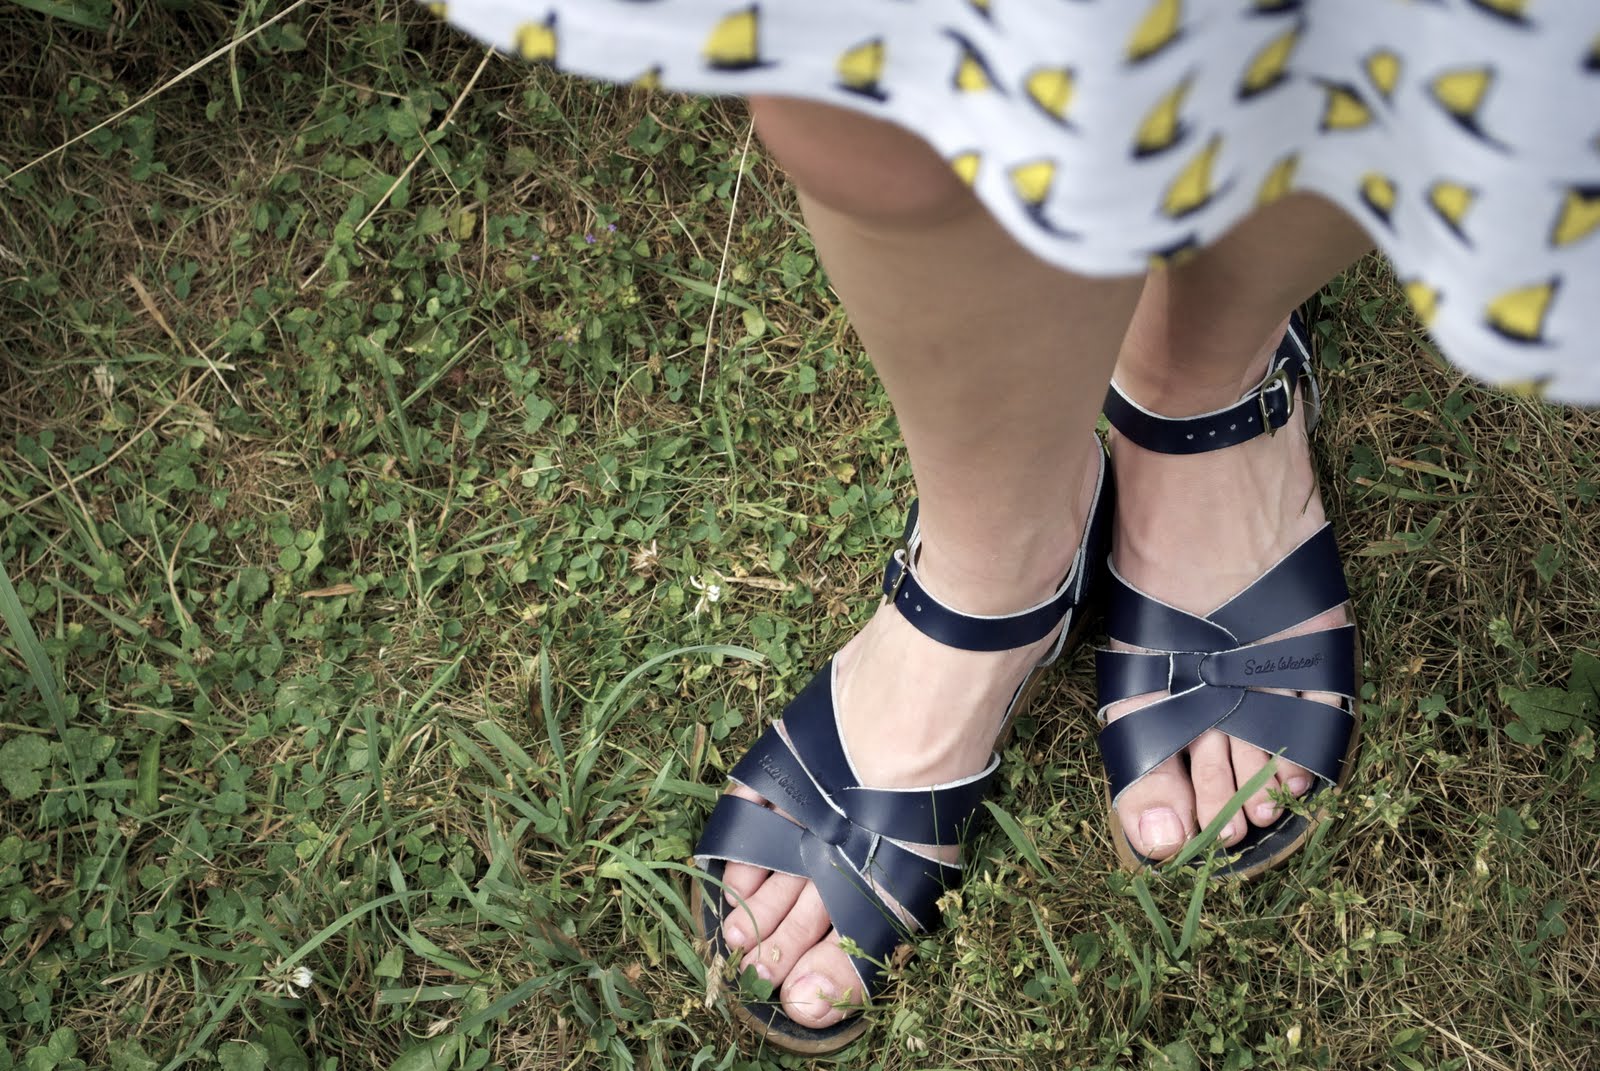 Any summer sandal suggestions to hide bunions? : femalefashionadvice